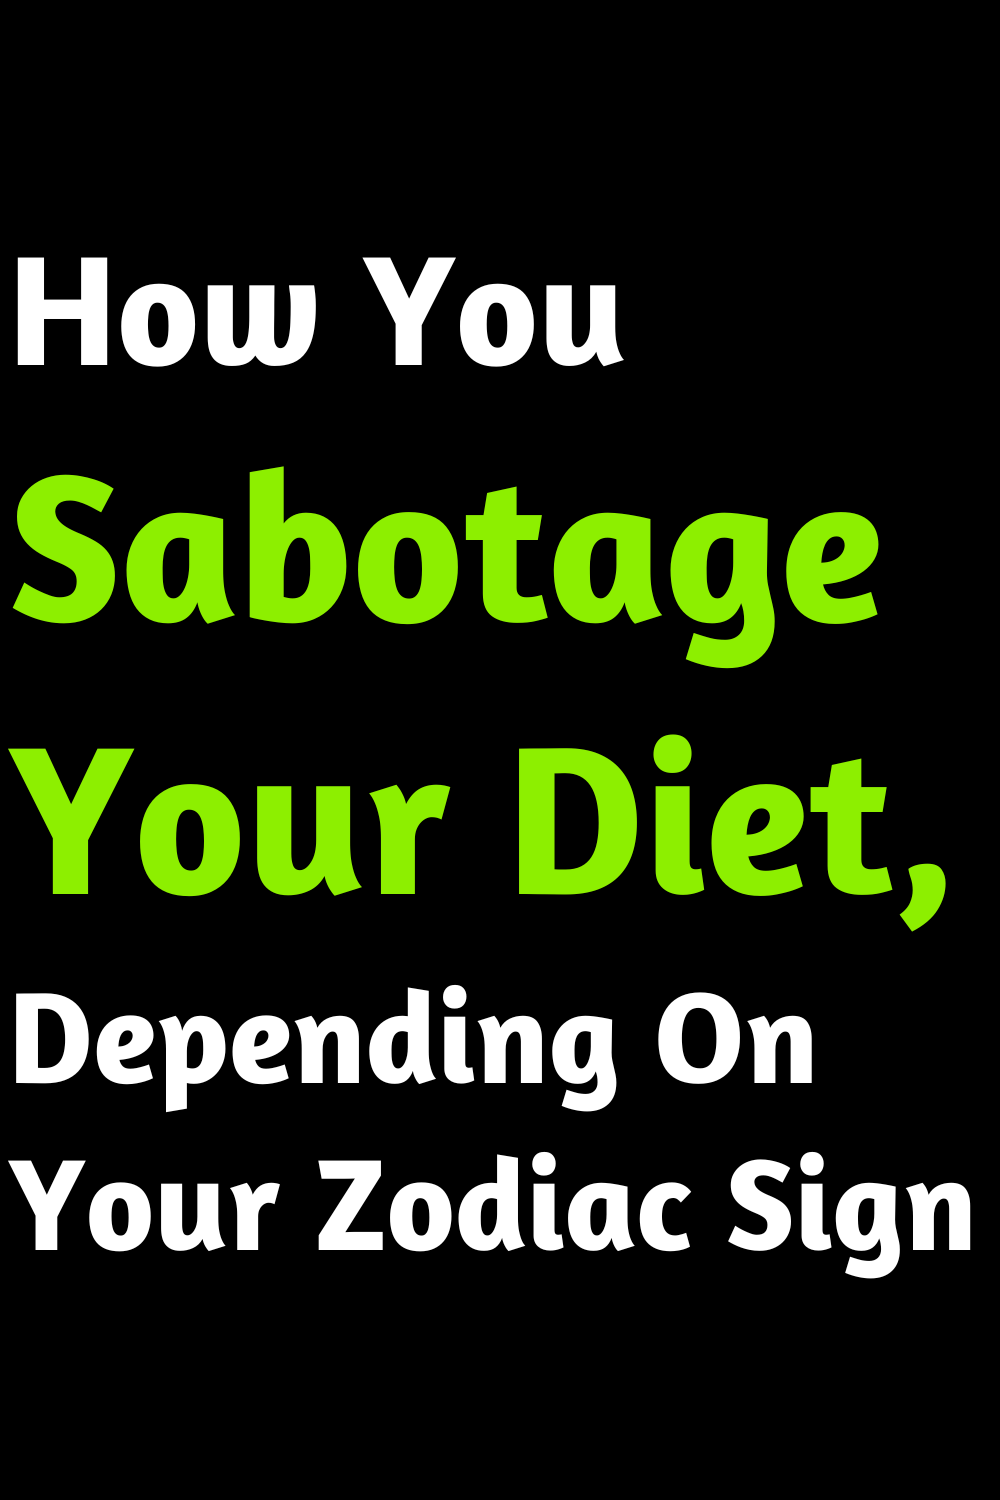 How You Sabotage Your Diet, Depending On Your Zodiac Sign